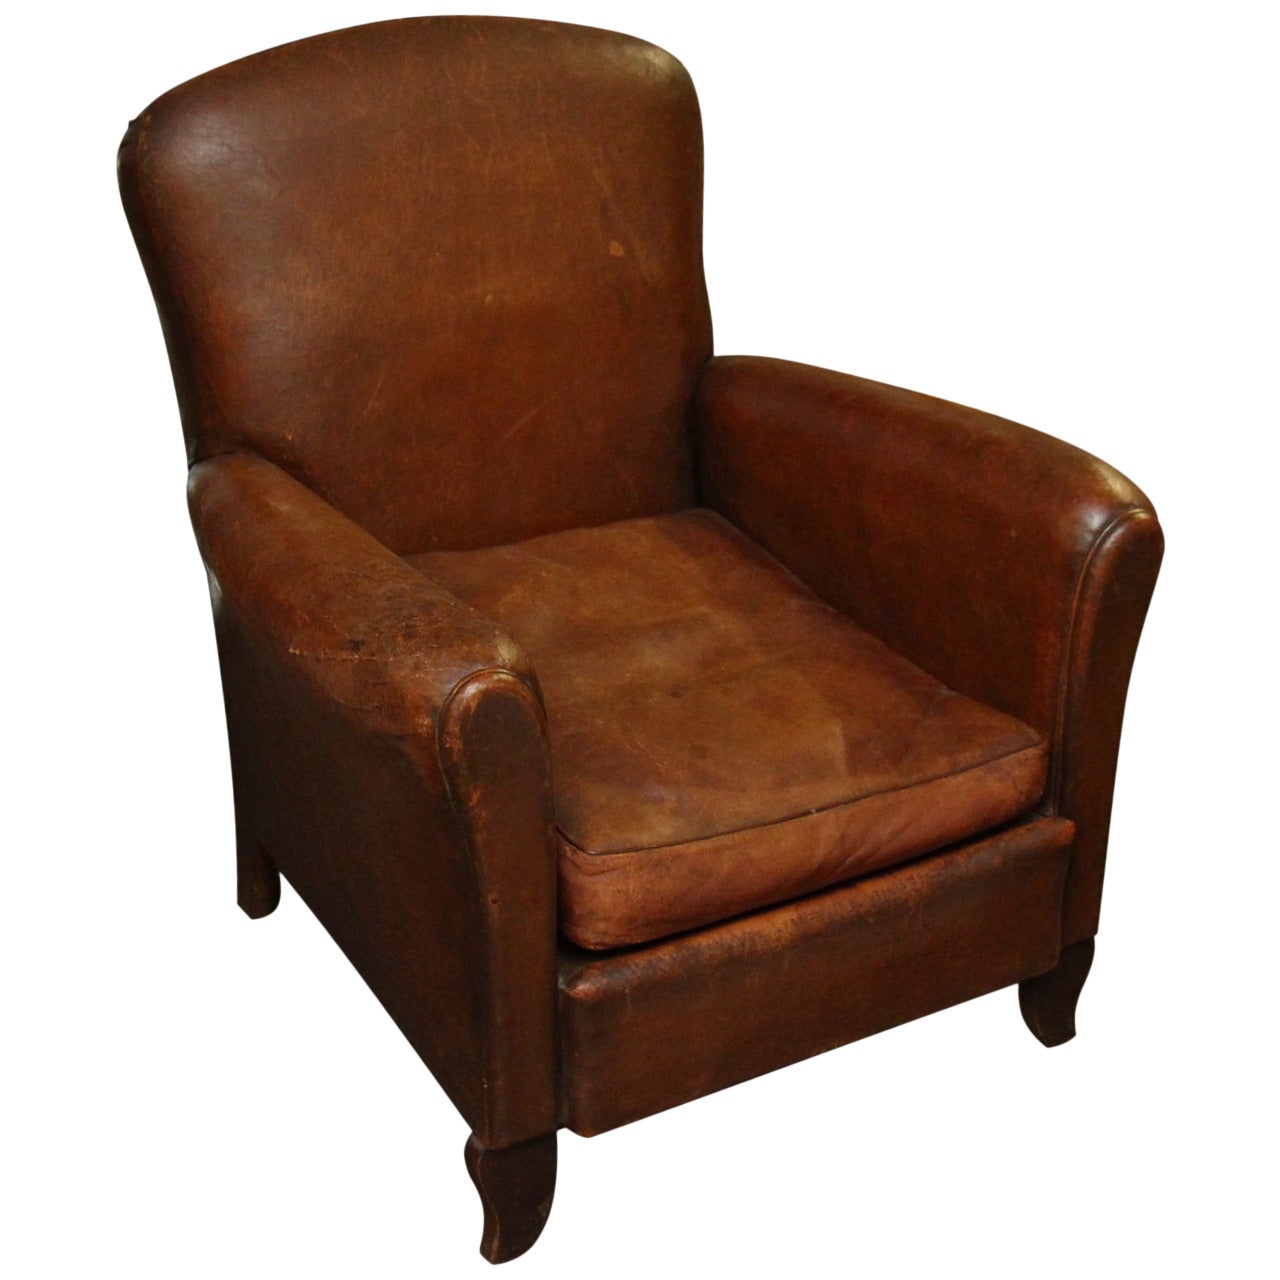 1940s French Leather Club Chair